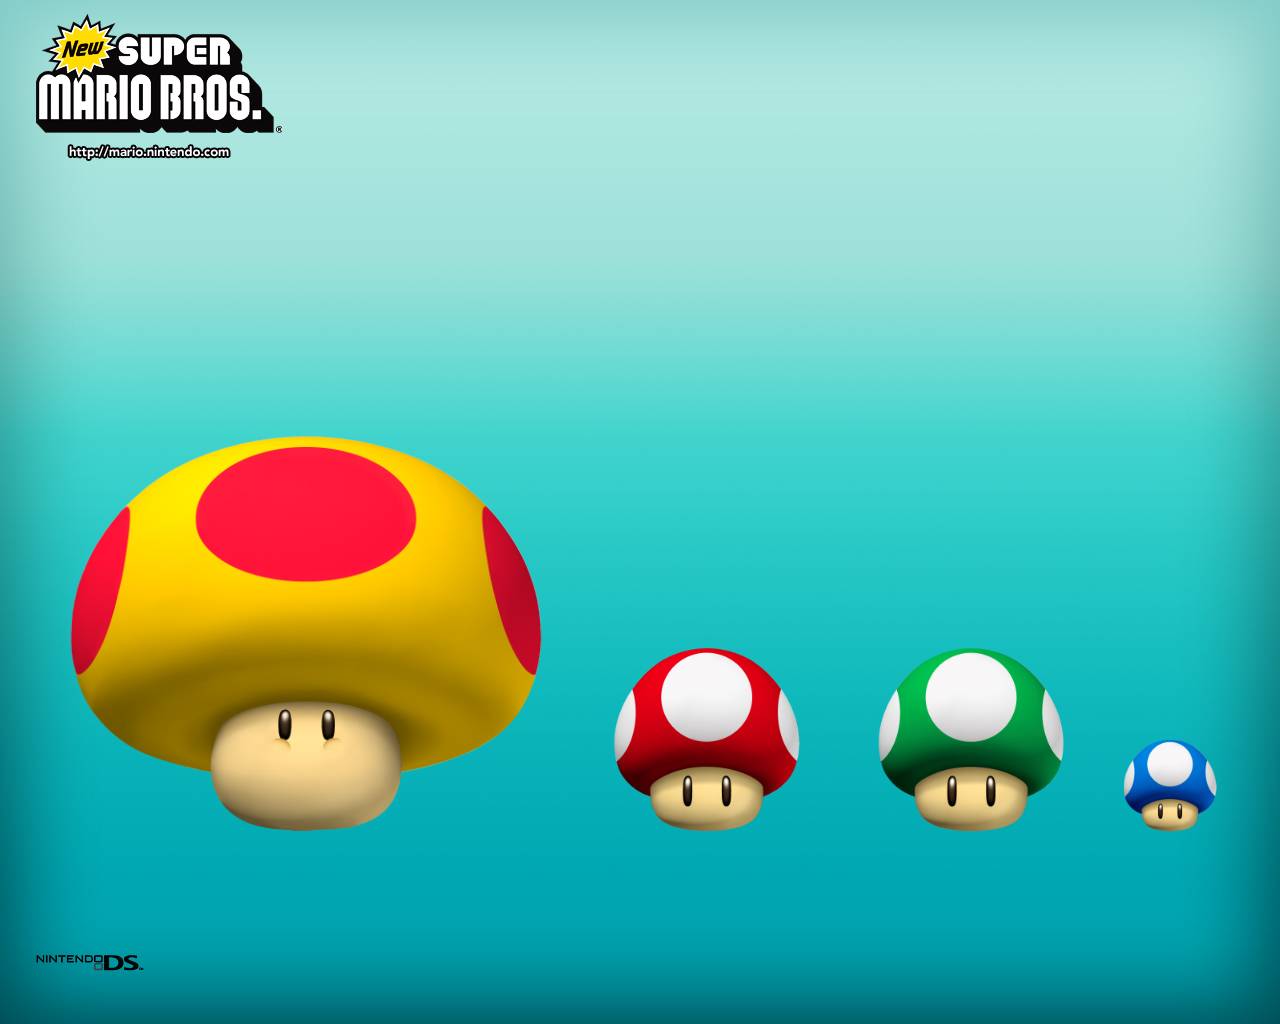 Latest Screens : New Super Mario Bros Wallpapers